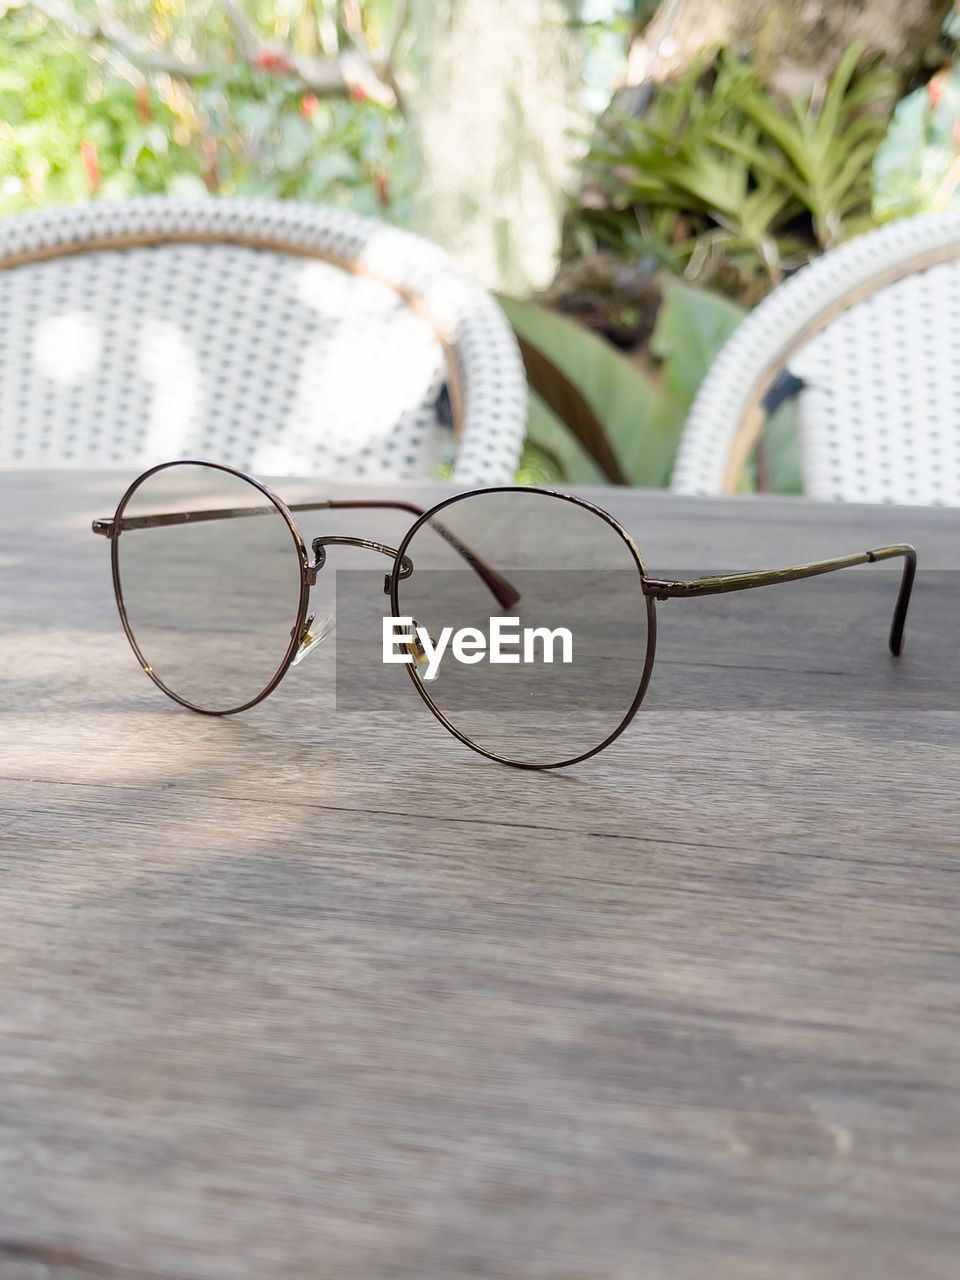 CLOSE-UP OF EYEGLASSES ON TABLE AGAINST PLANTS